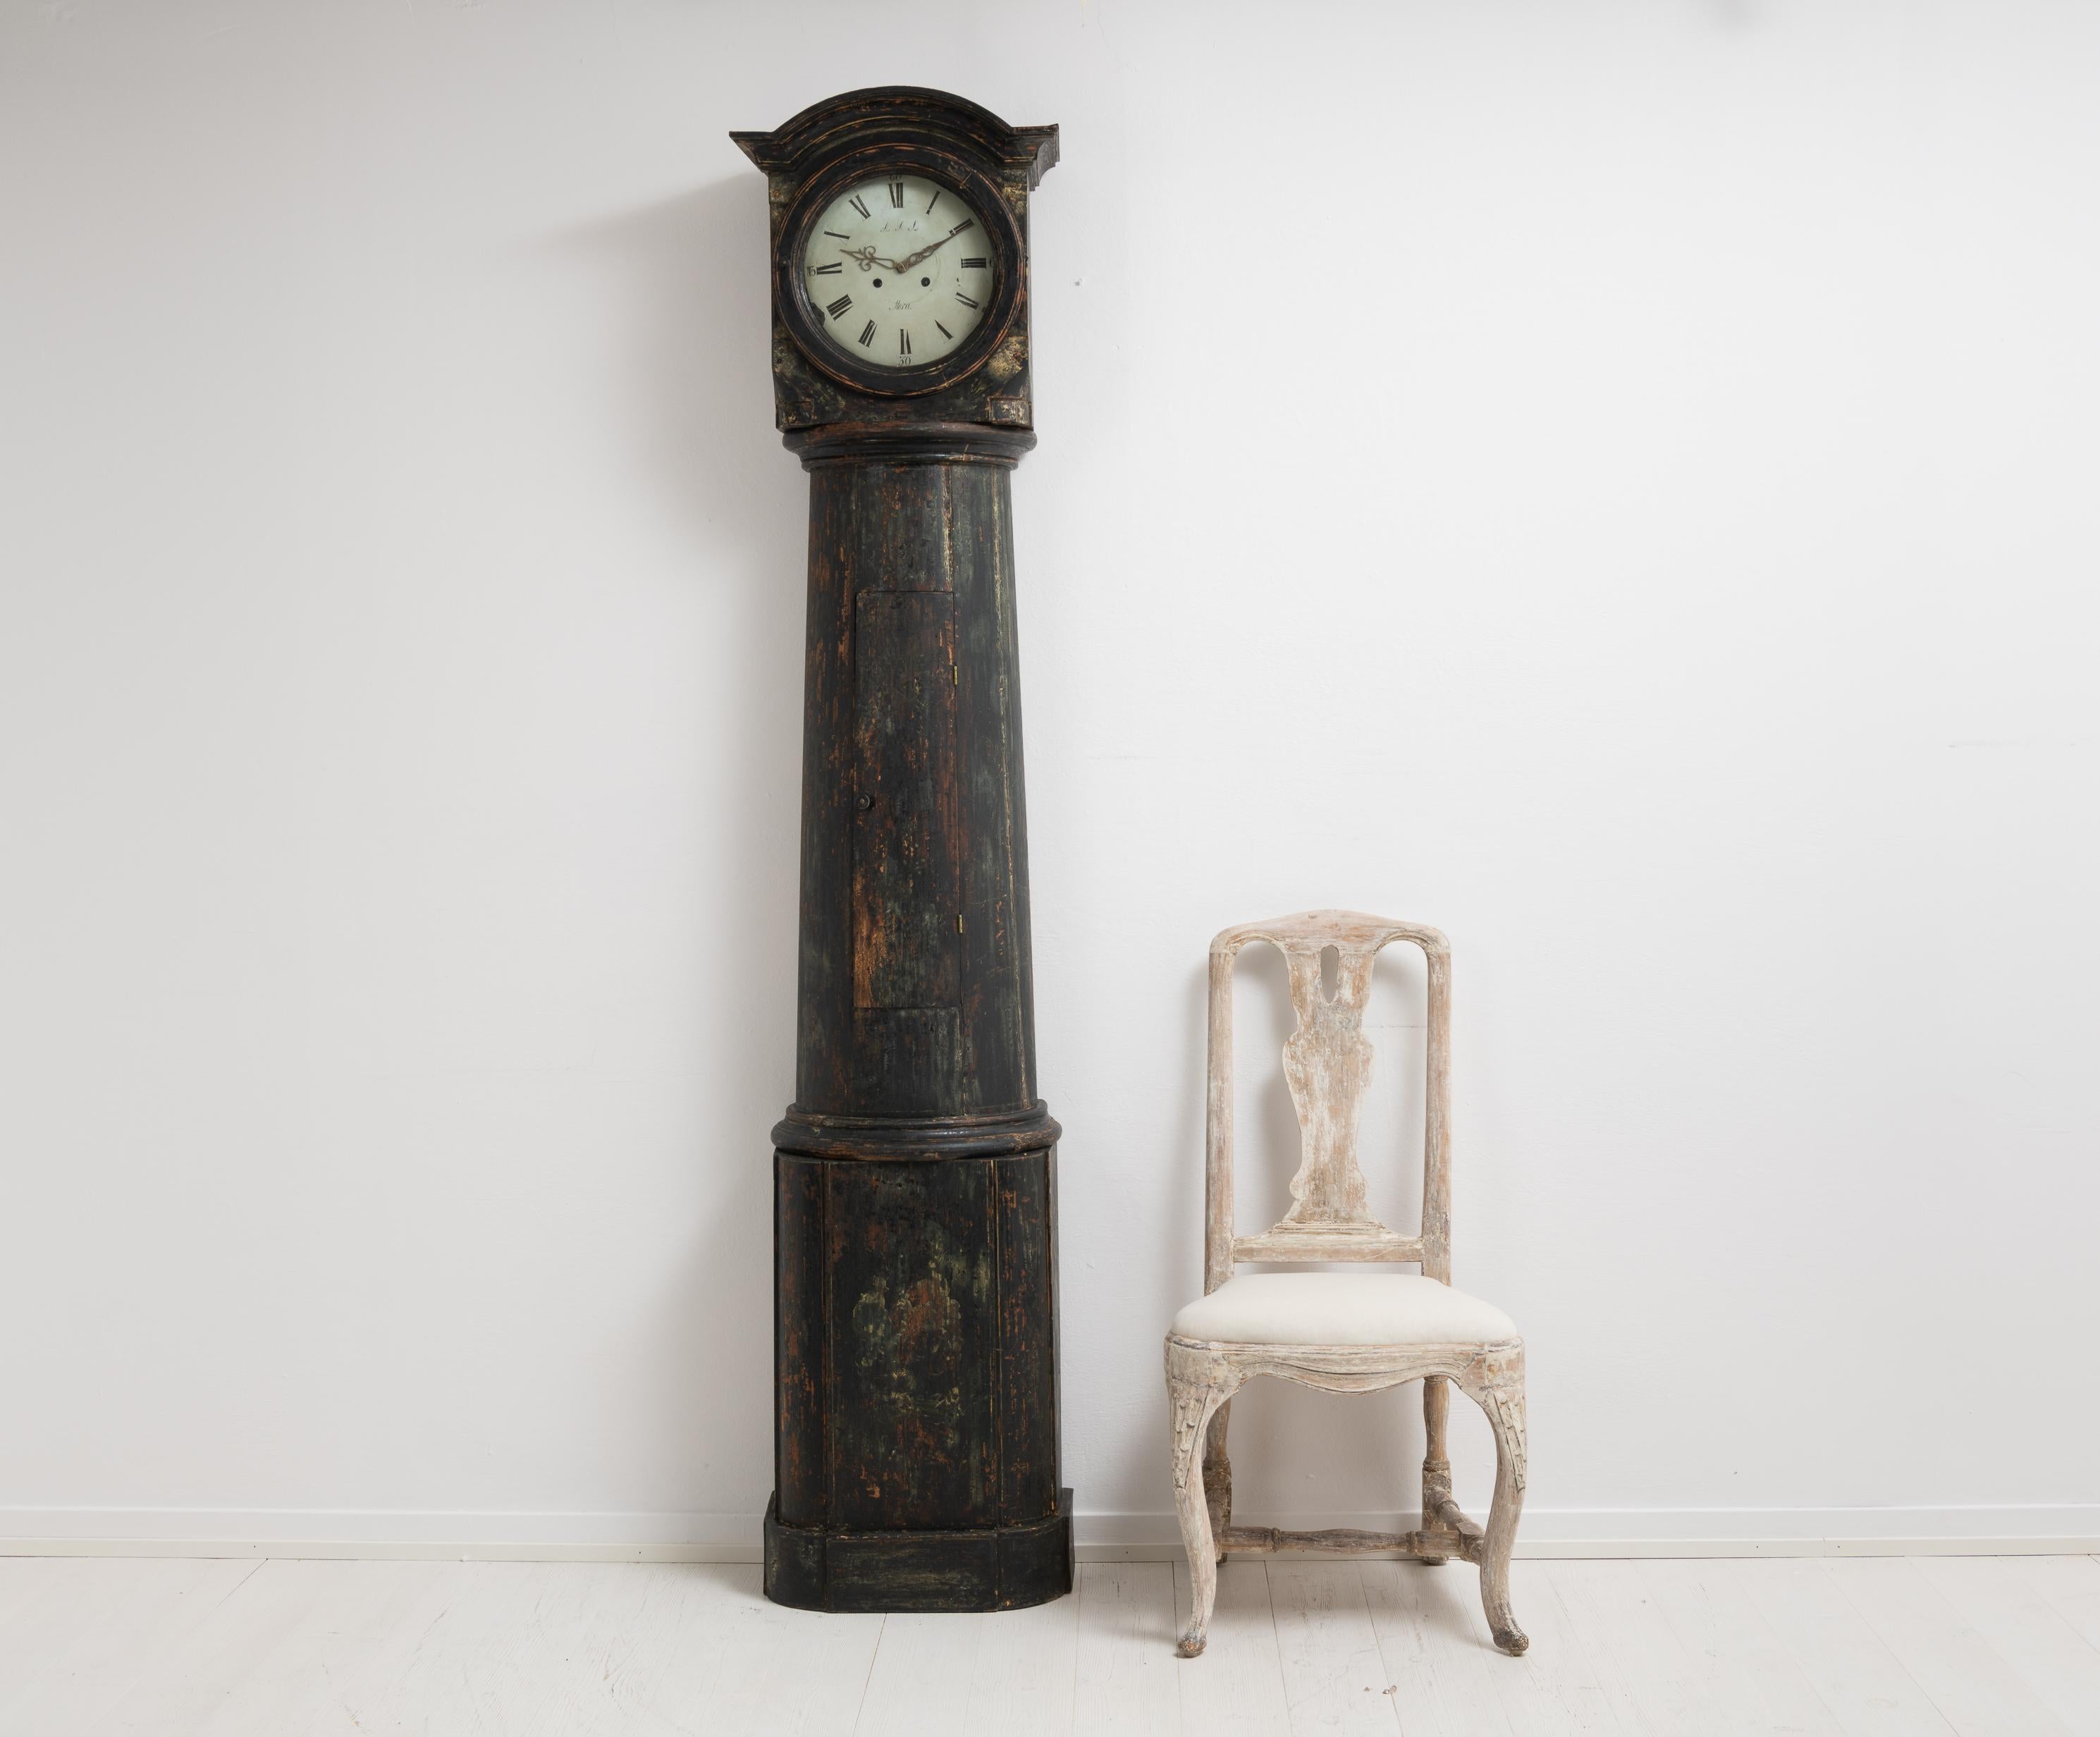 Swedish long case column clock in black made around 1820 to 1840. The clock is in the shape of a column with a square head and the original clock work. Made in painted pine with old black paint from the late 1800s. The old paint is distressed with a